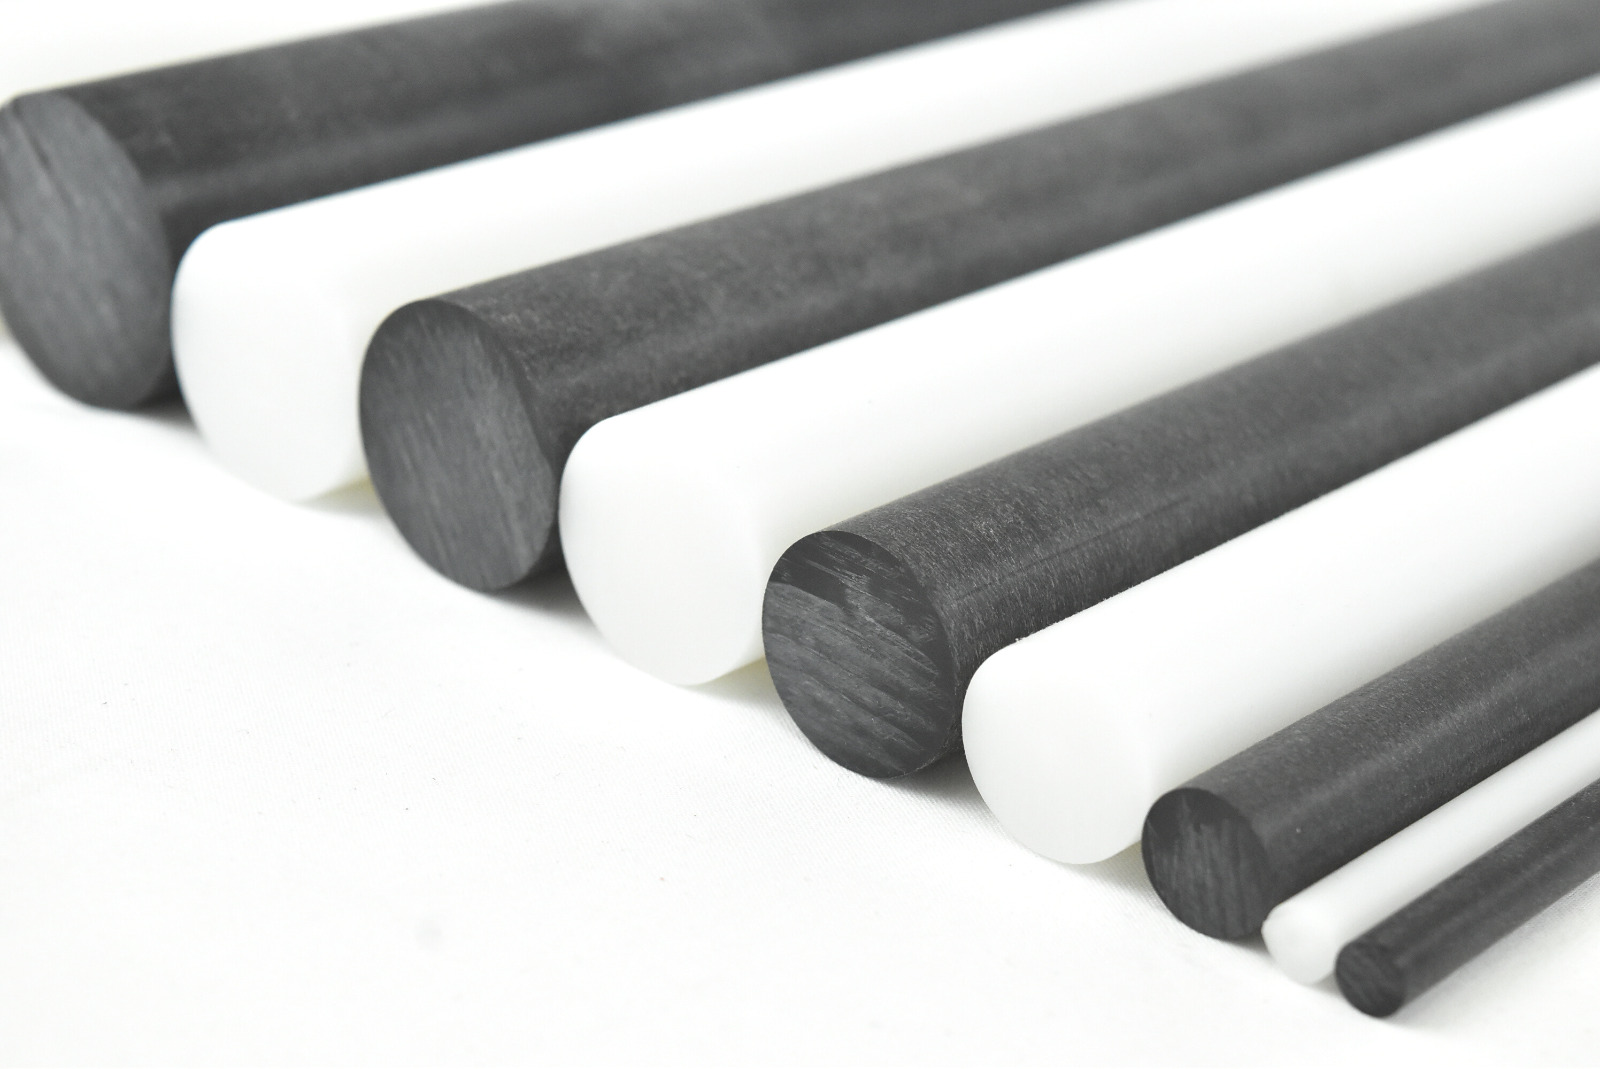 Delrin / Acetal Copolymer Rod, Various Diameters, Colors, and Lengths